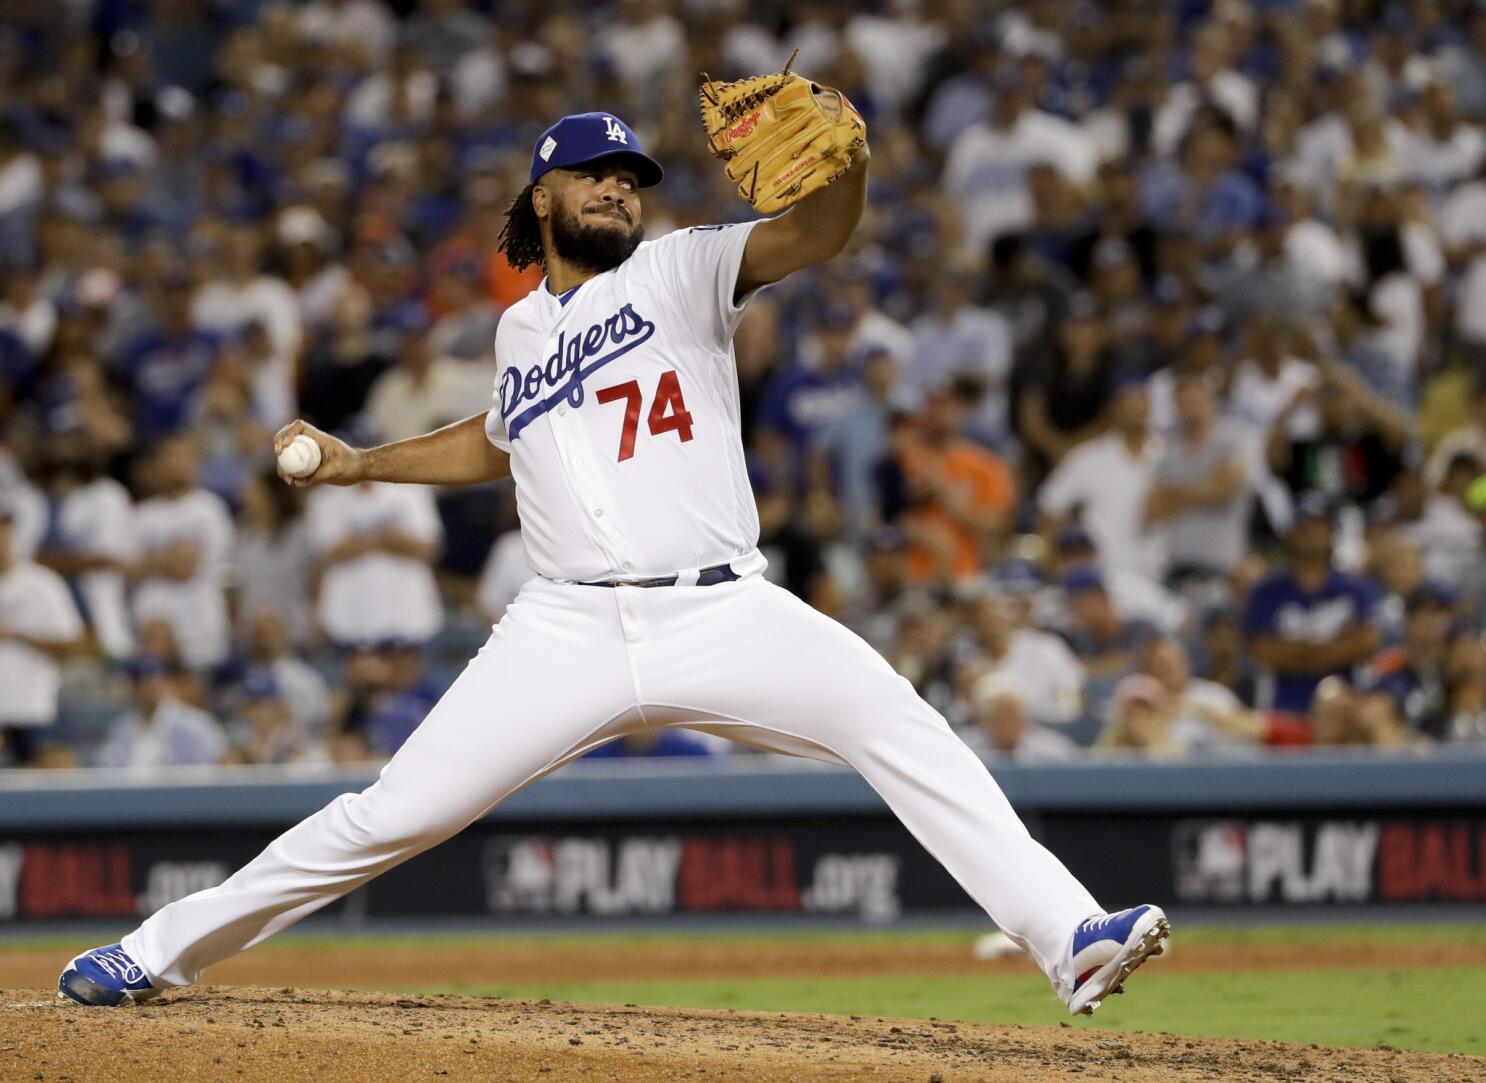 Dodgers Closer Kenley Jansen Mocks the Astros Chances of Winning Game 7:  Houston Can Only Get Revenge with a World Series Championship